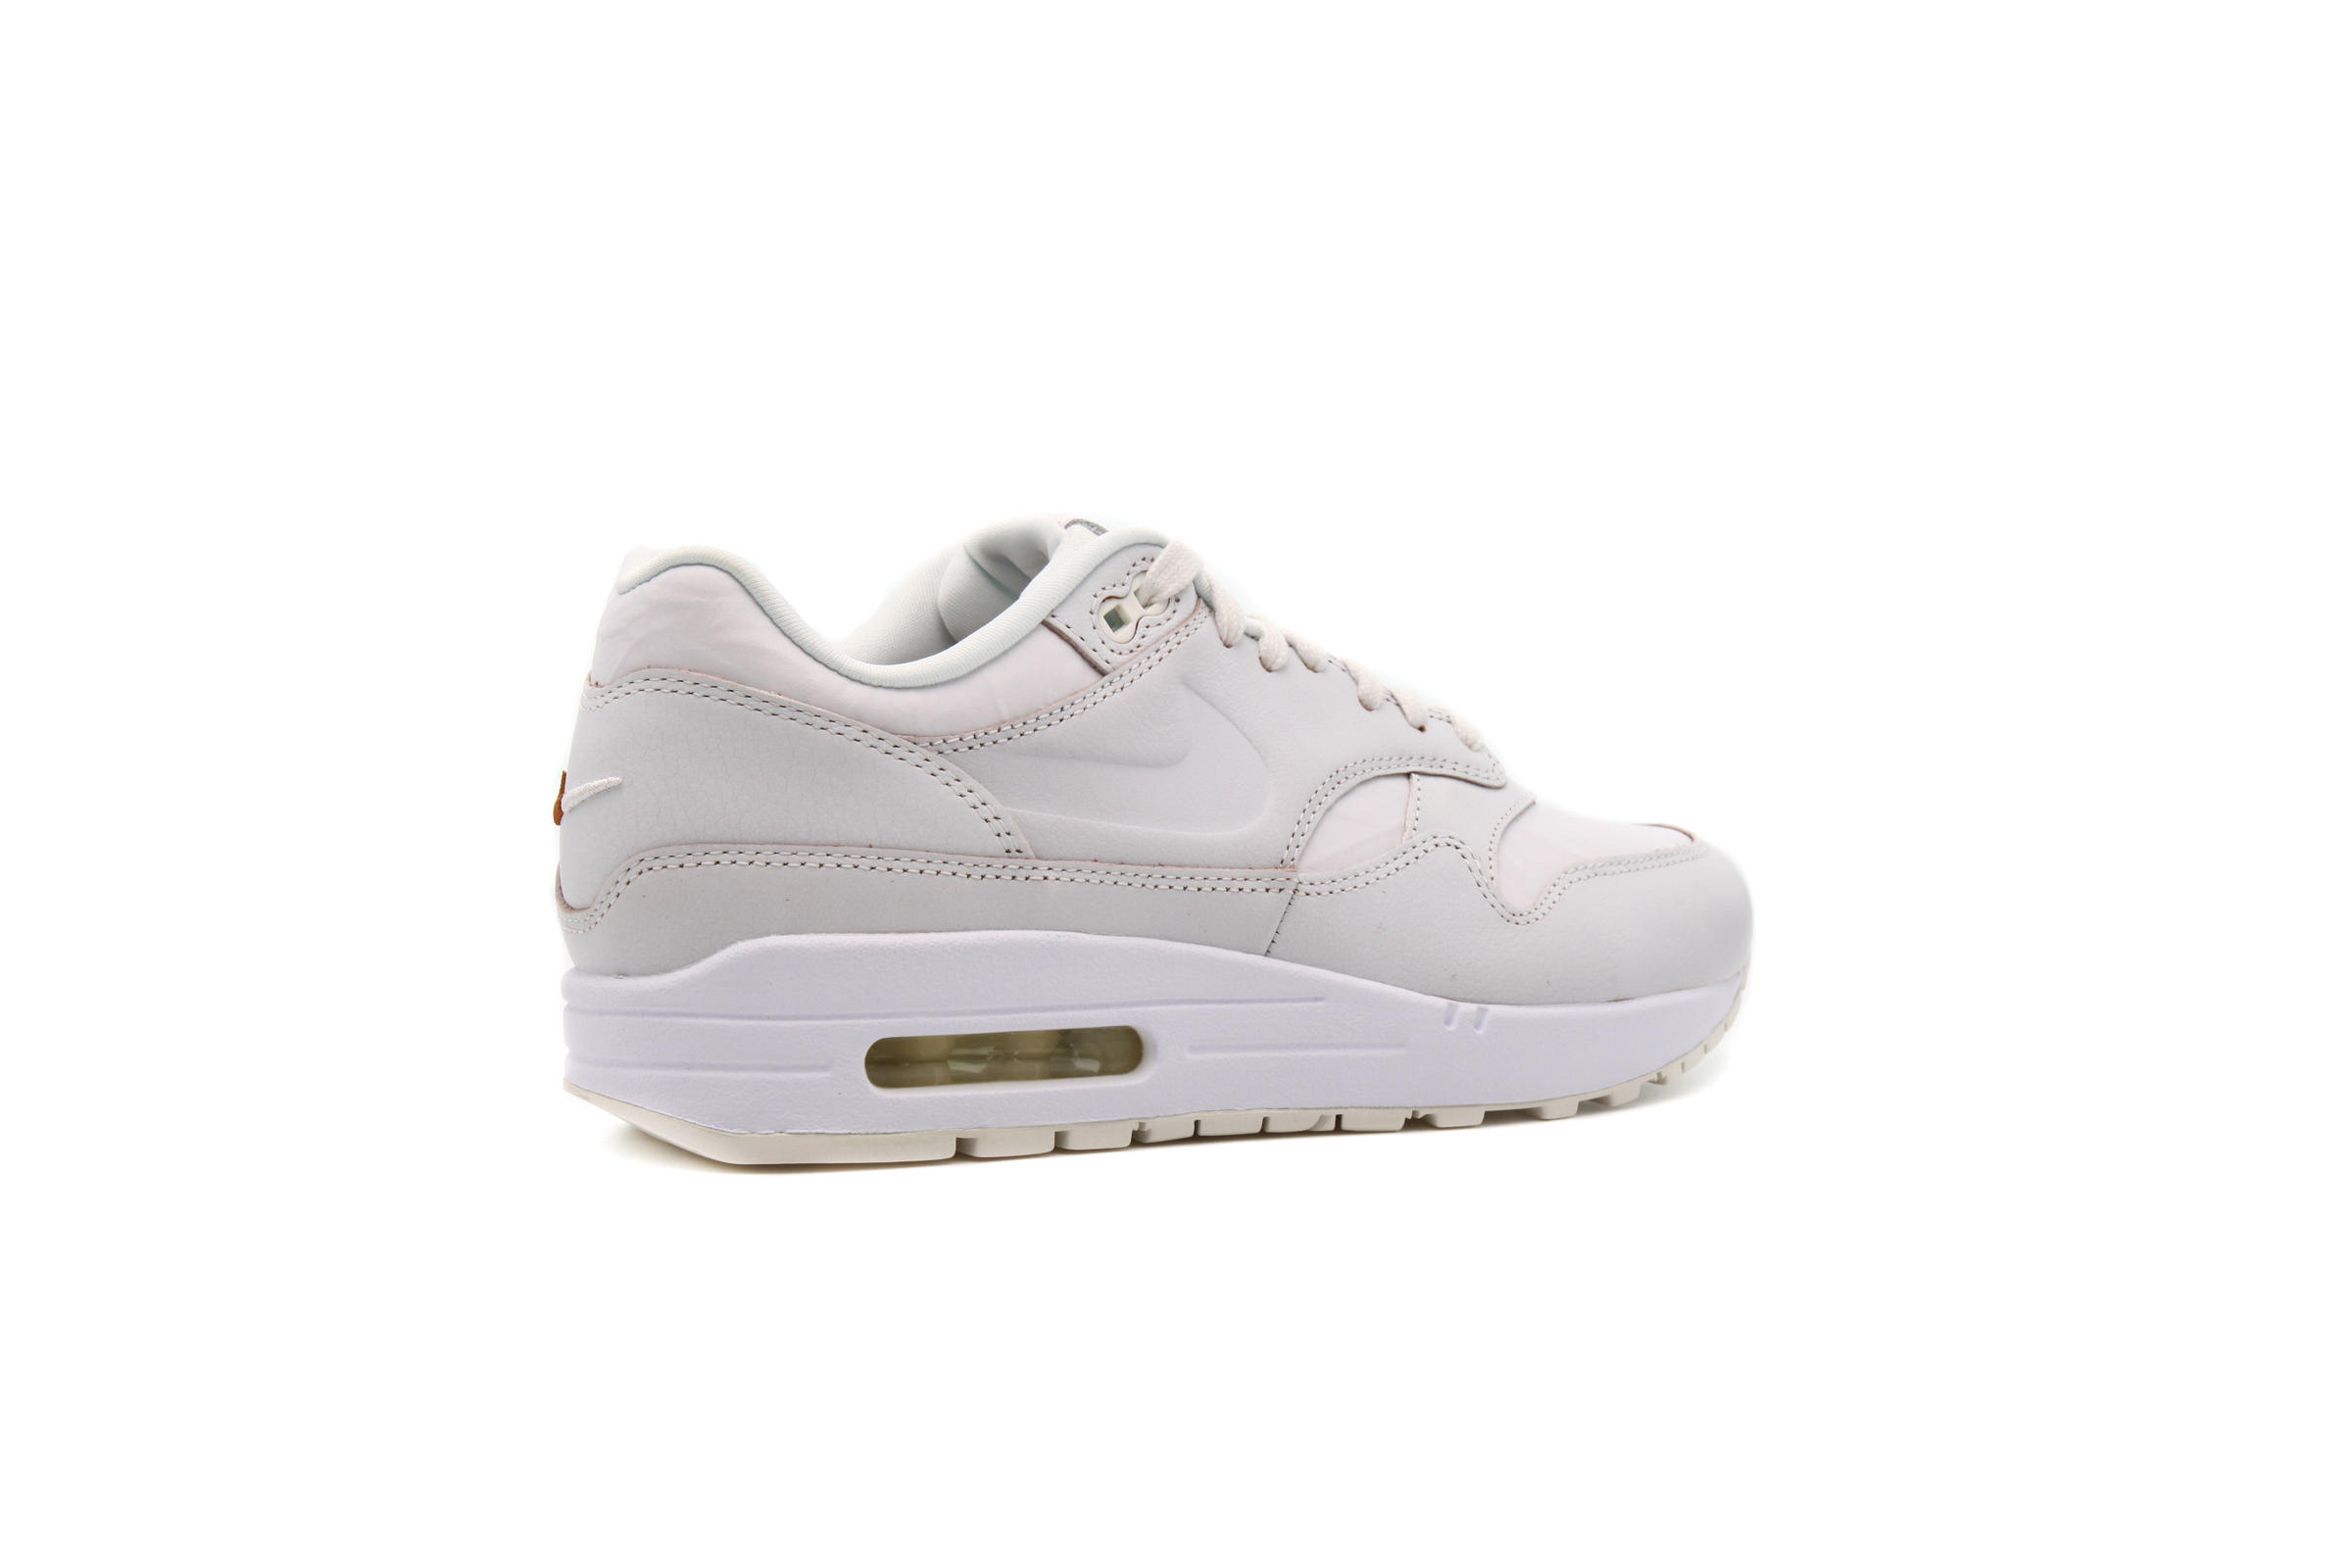 Nike WMNS AIR MAX 1 "HIS AND HERS"